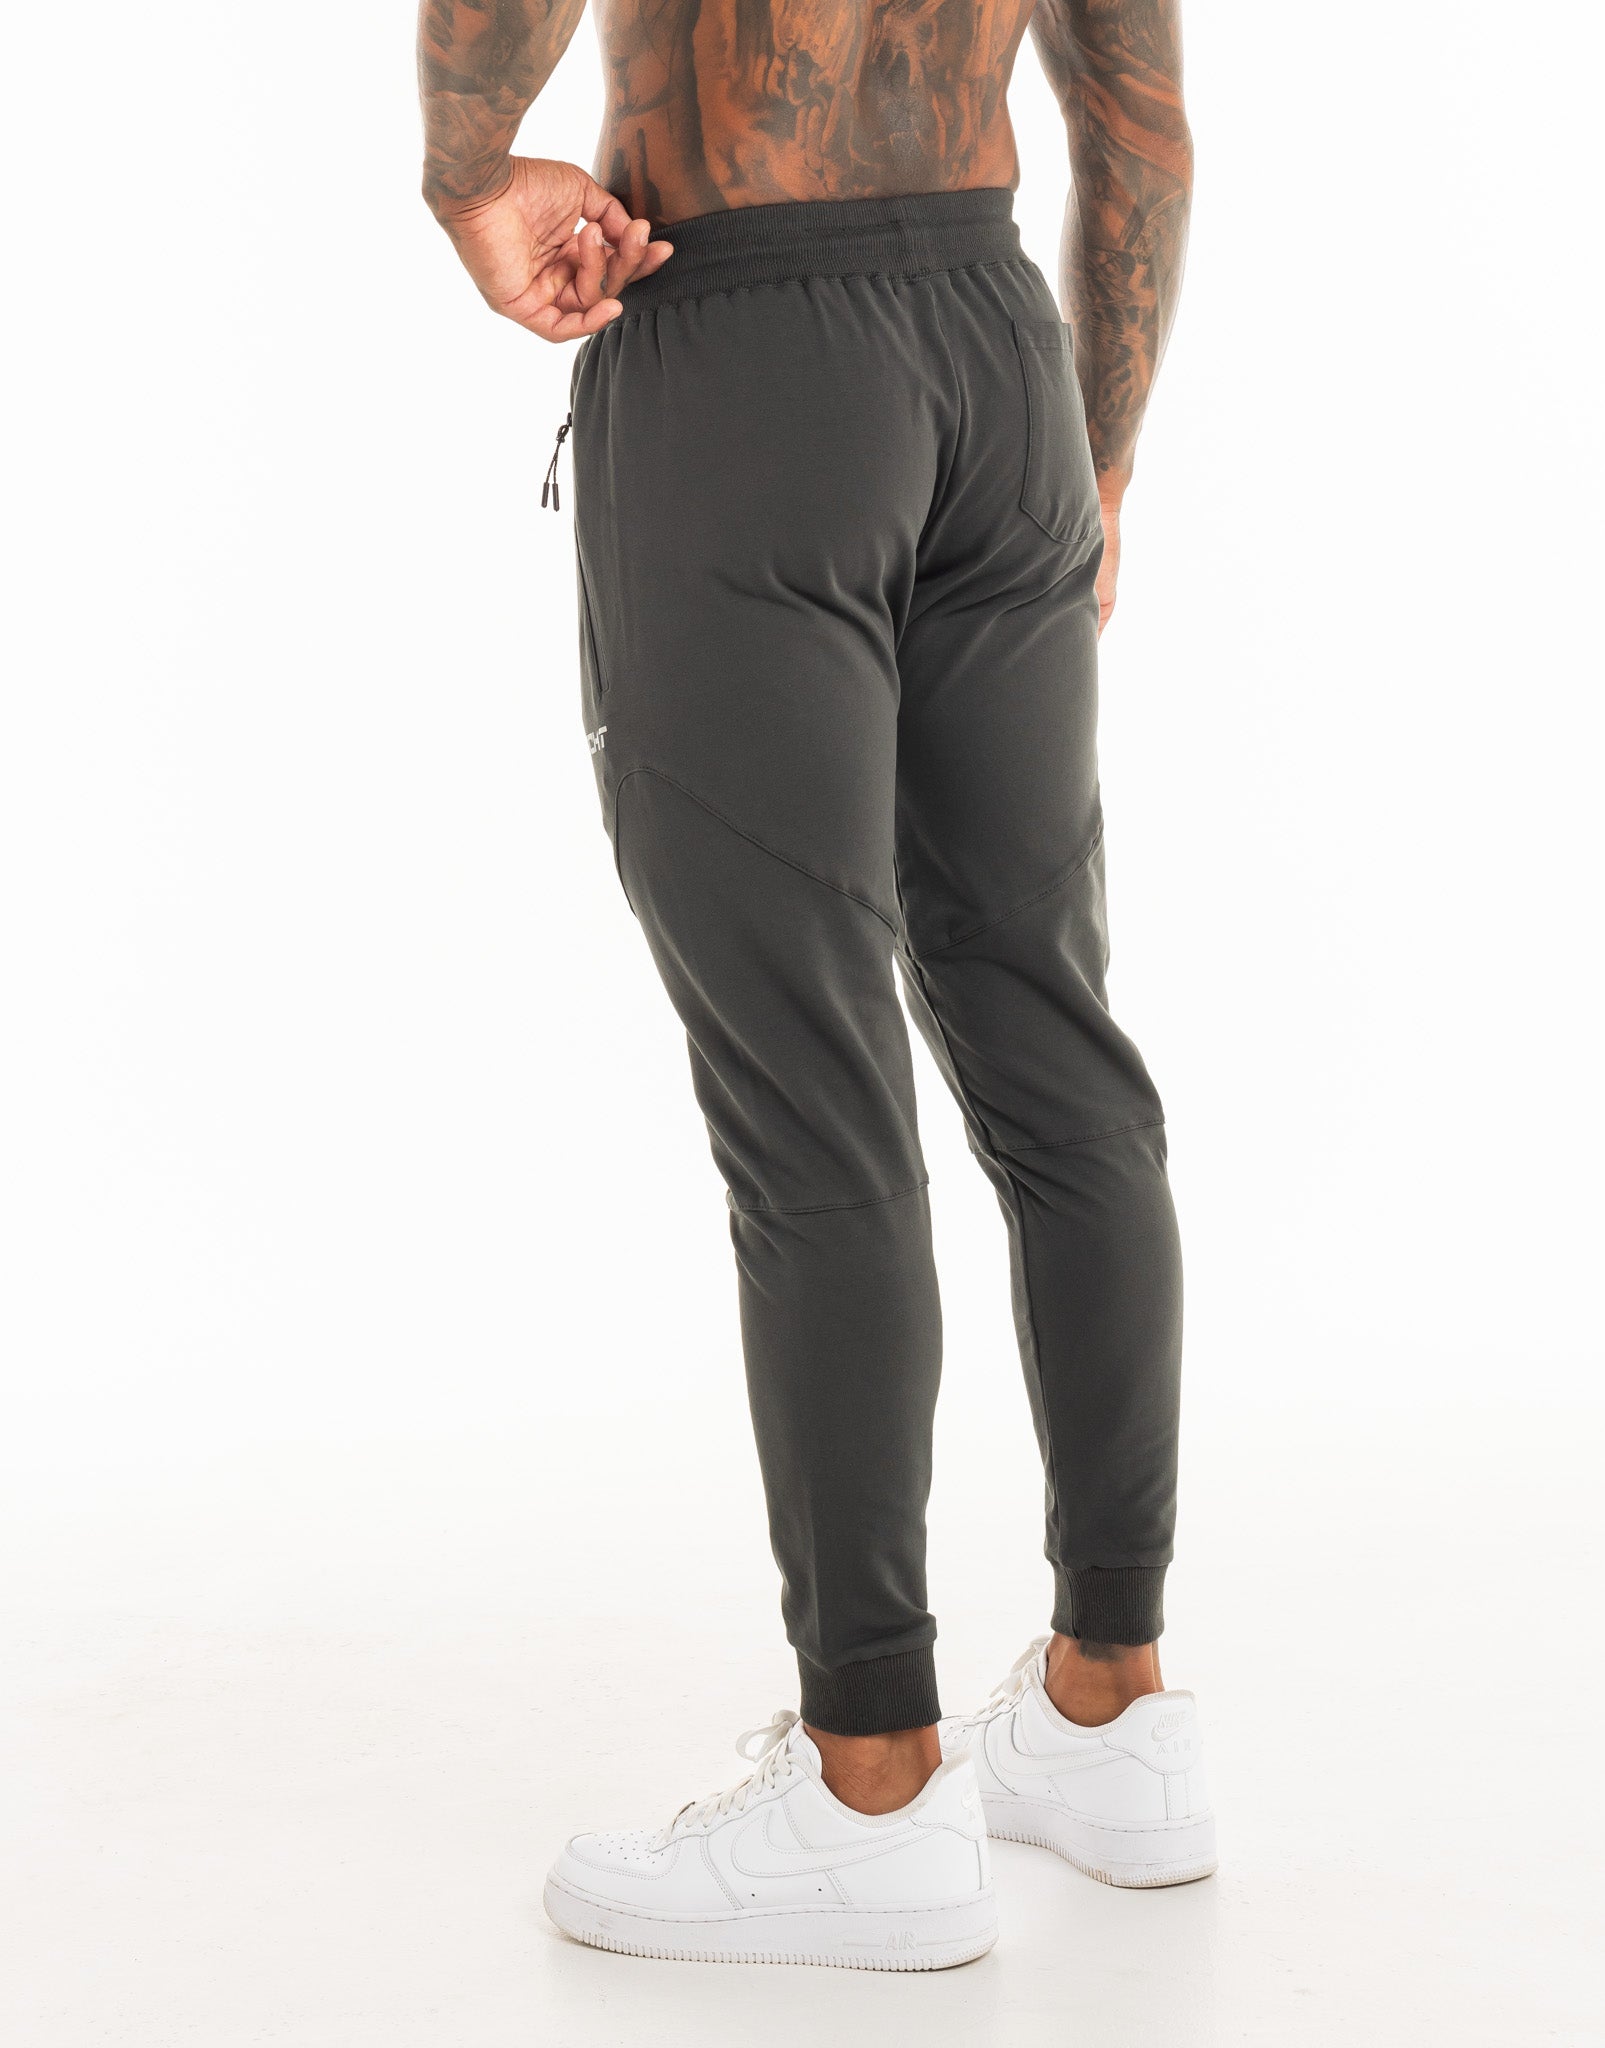 Echt Tapered Joggers - Pirate Black